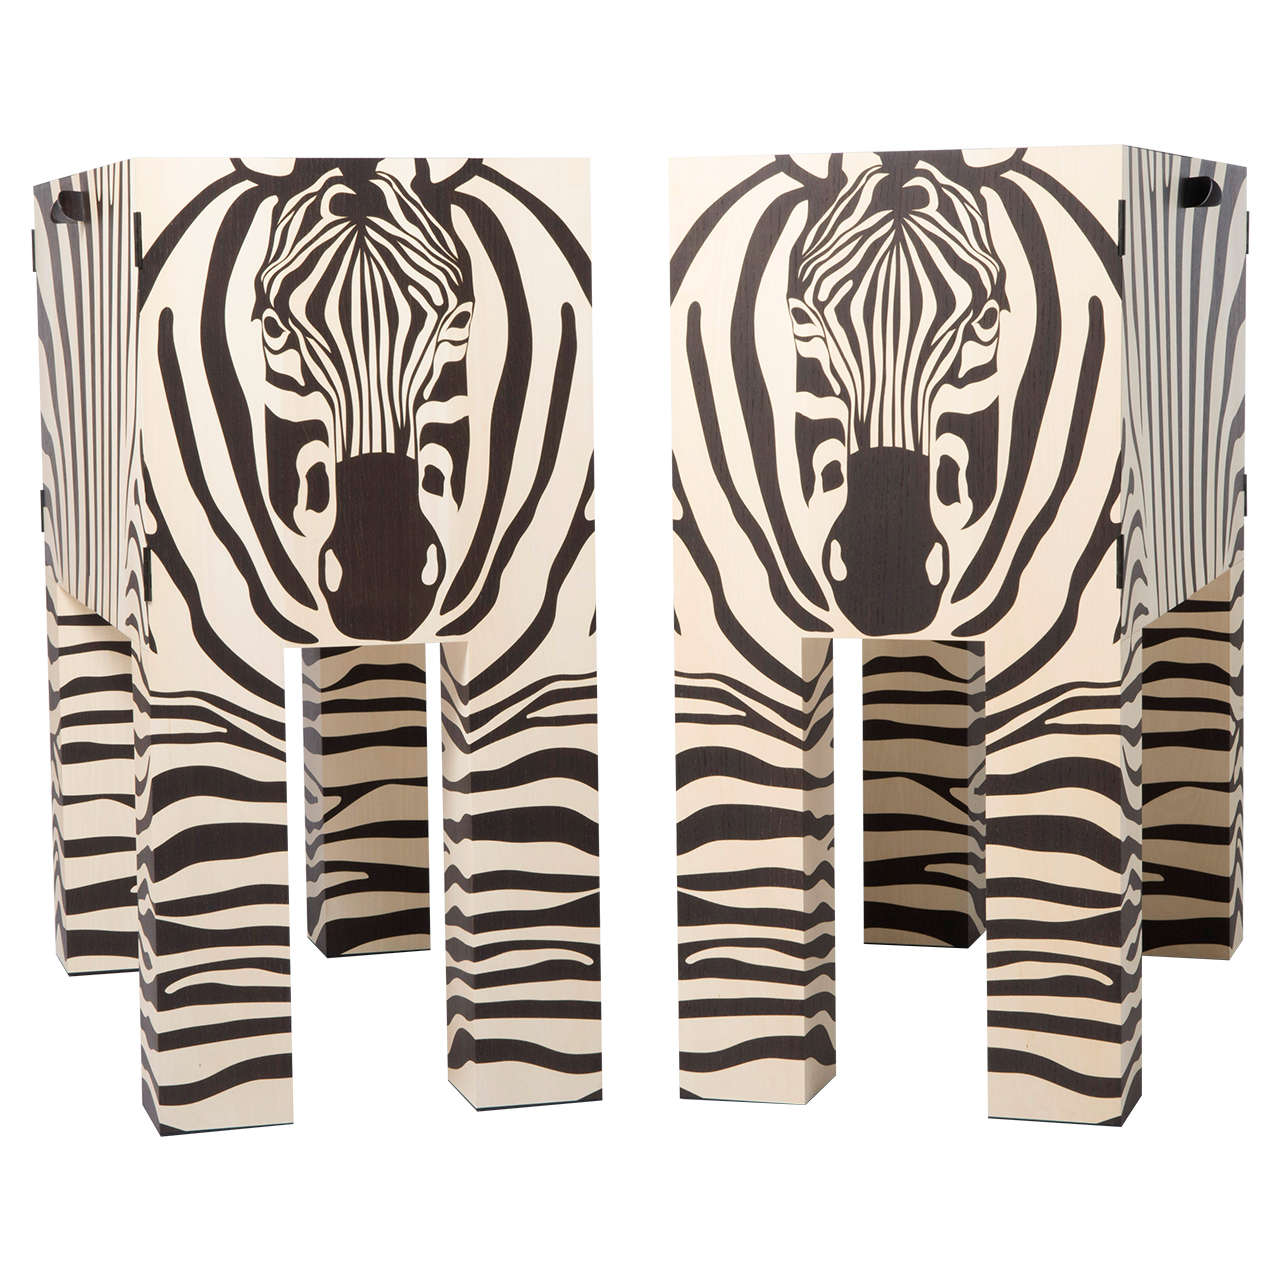 John Makepeace pair of marquetry “Zebra” cabinets, England 2010